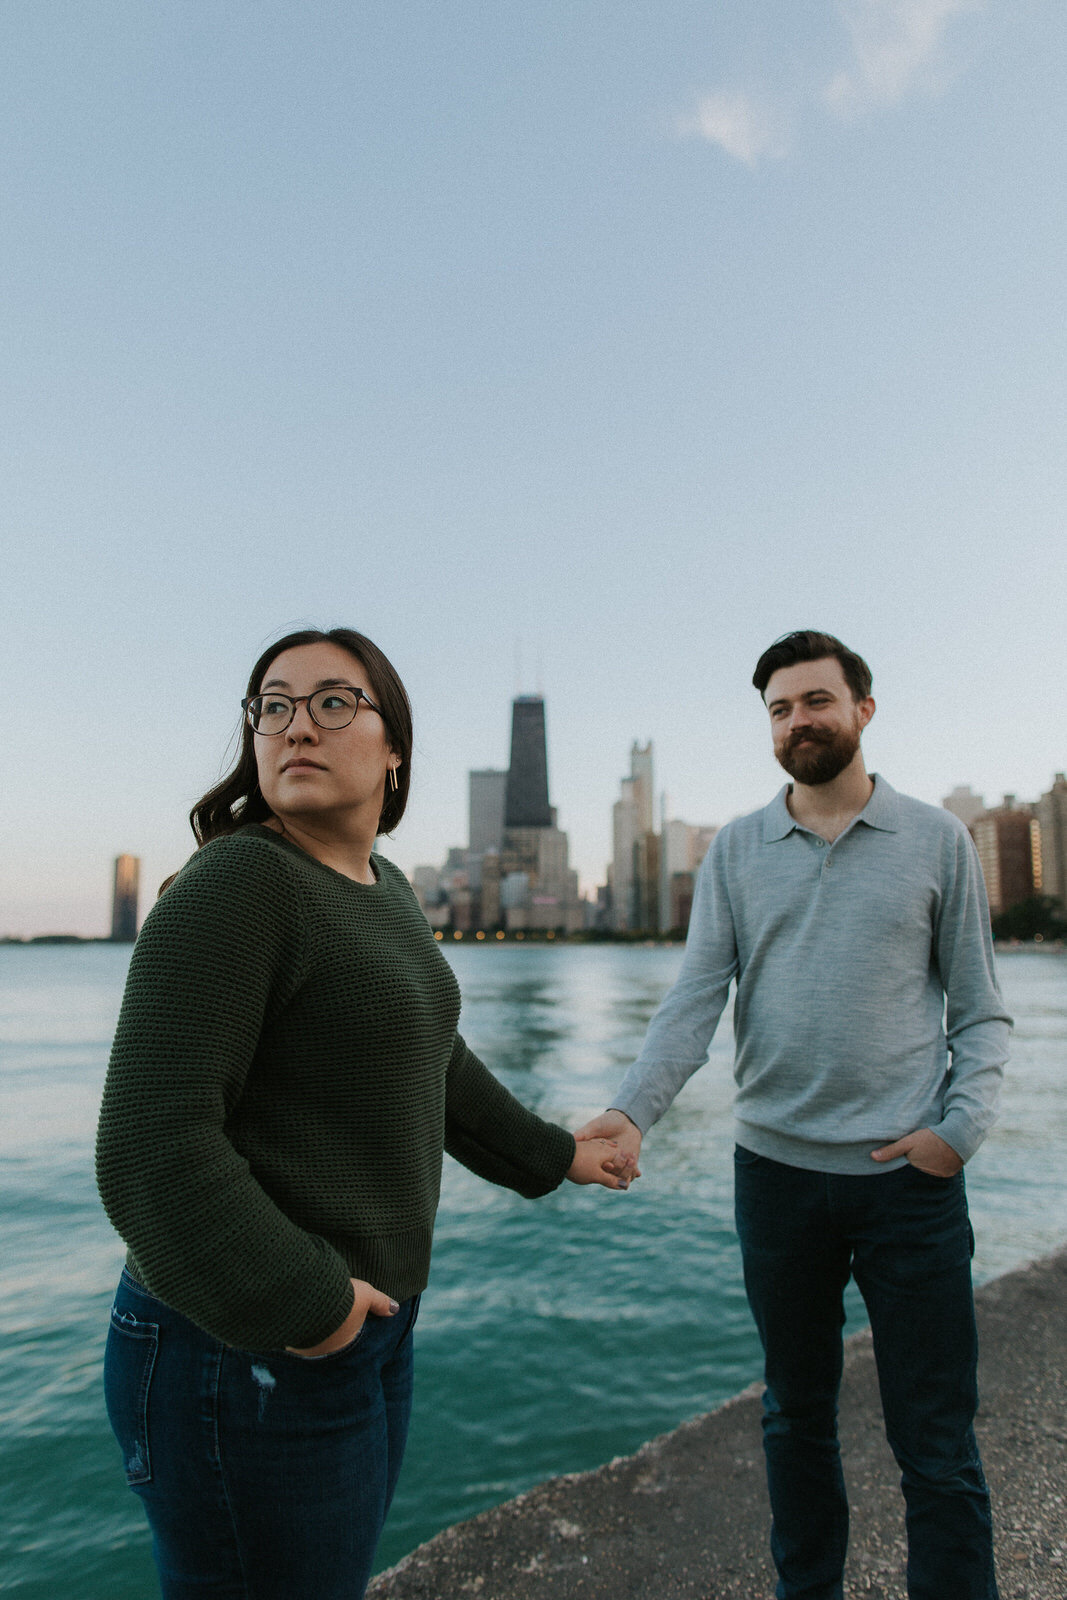 engaged-chicago-north-avenue-beach-city-session-love-untraditional-rachael-marie-illinois-11